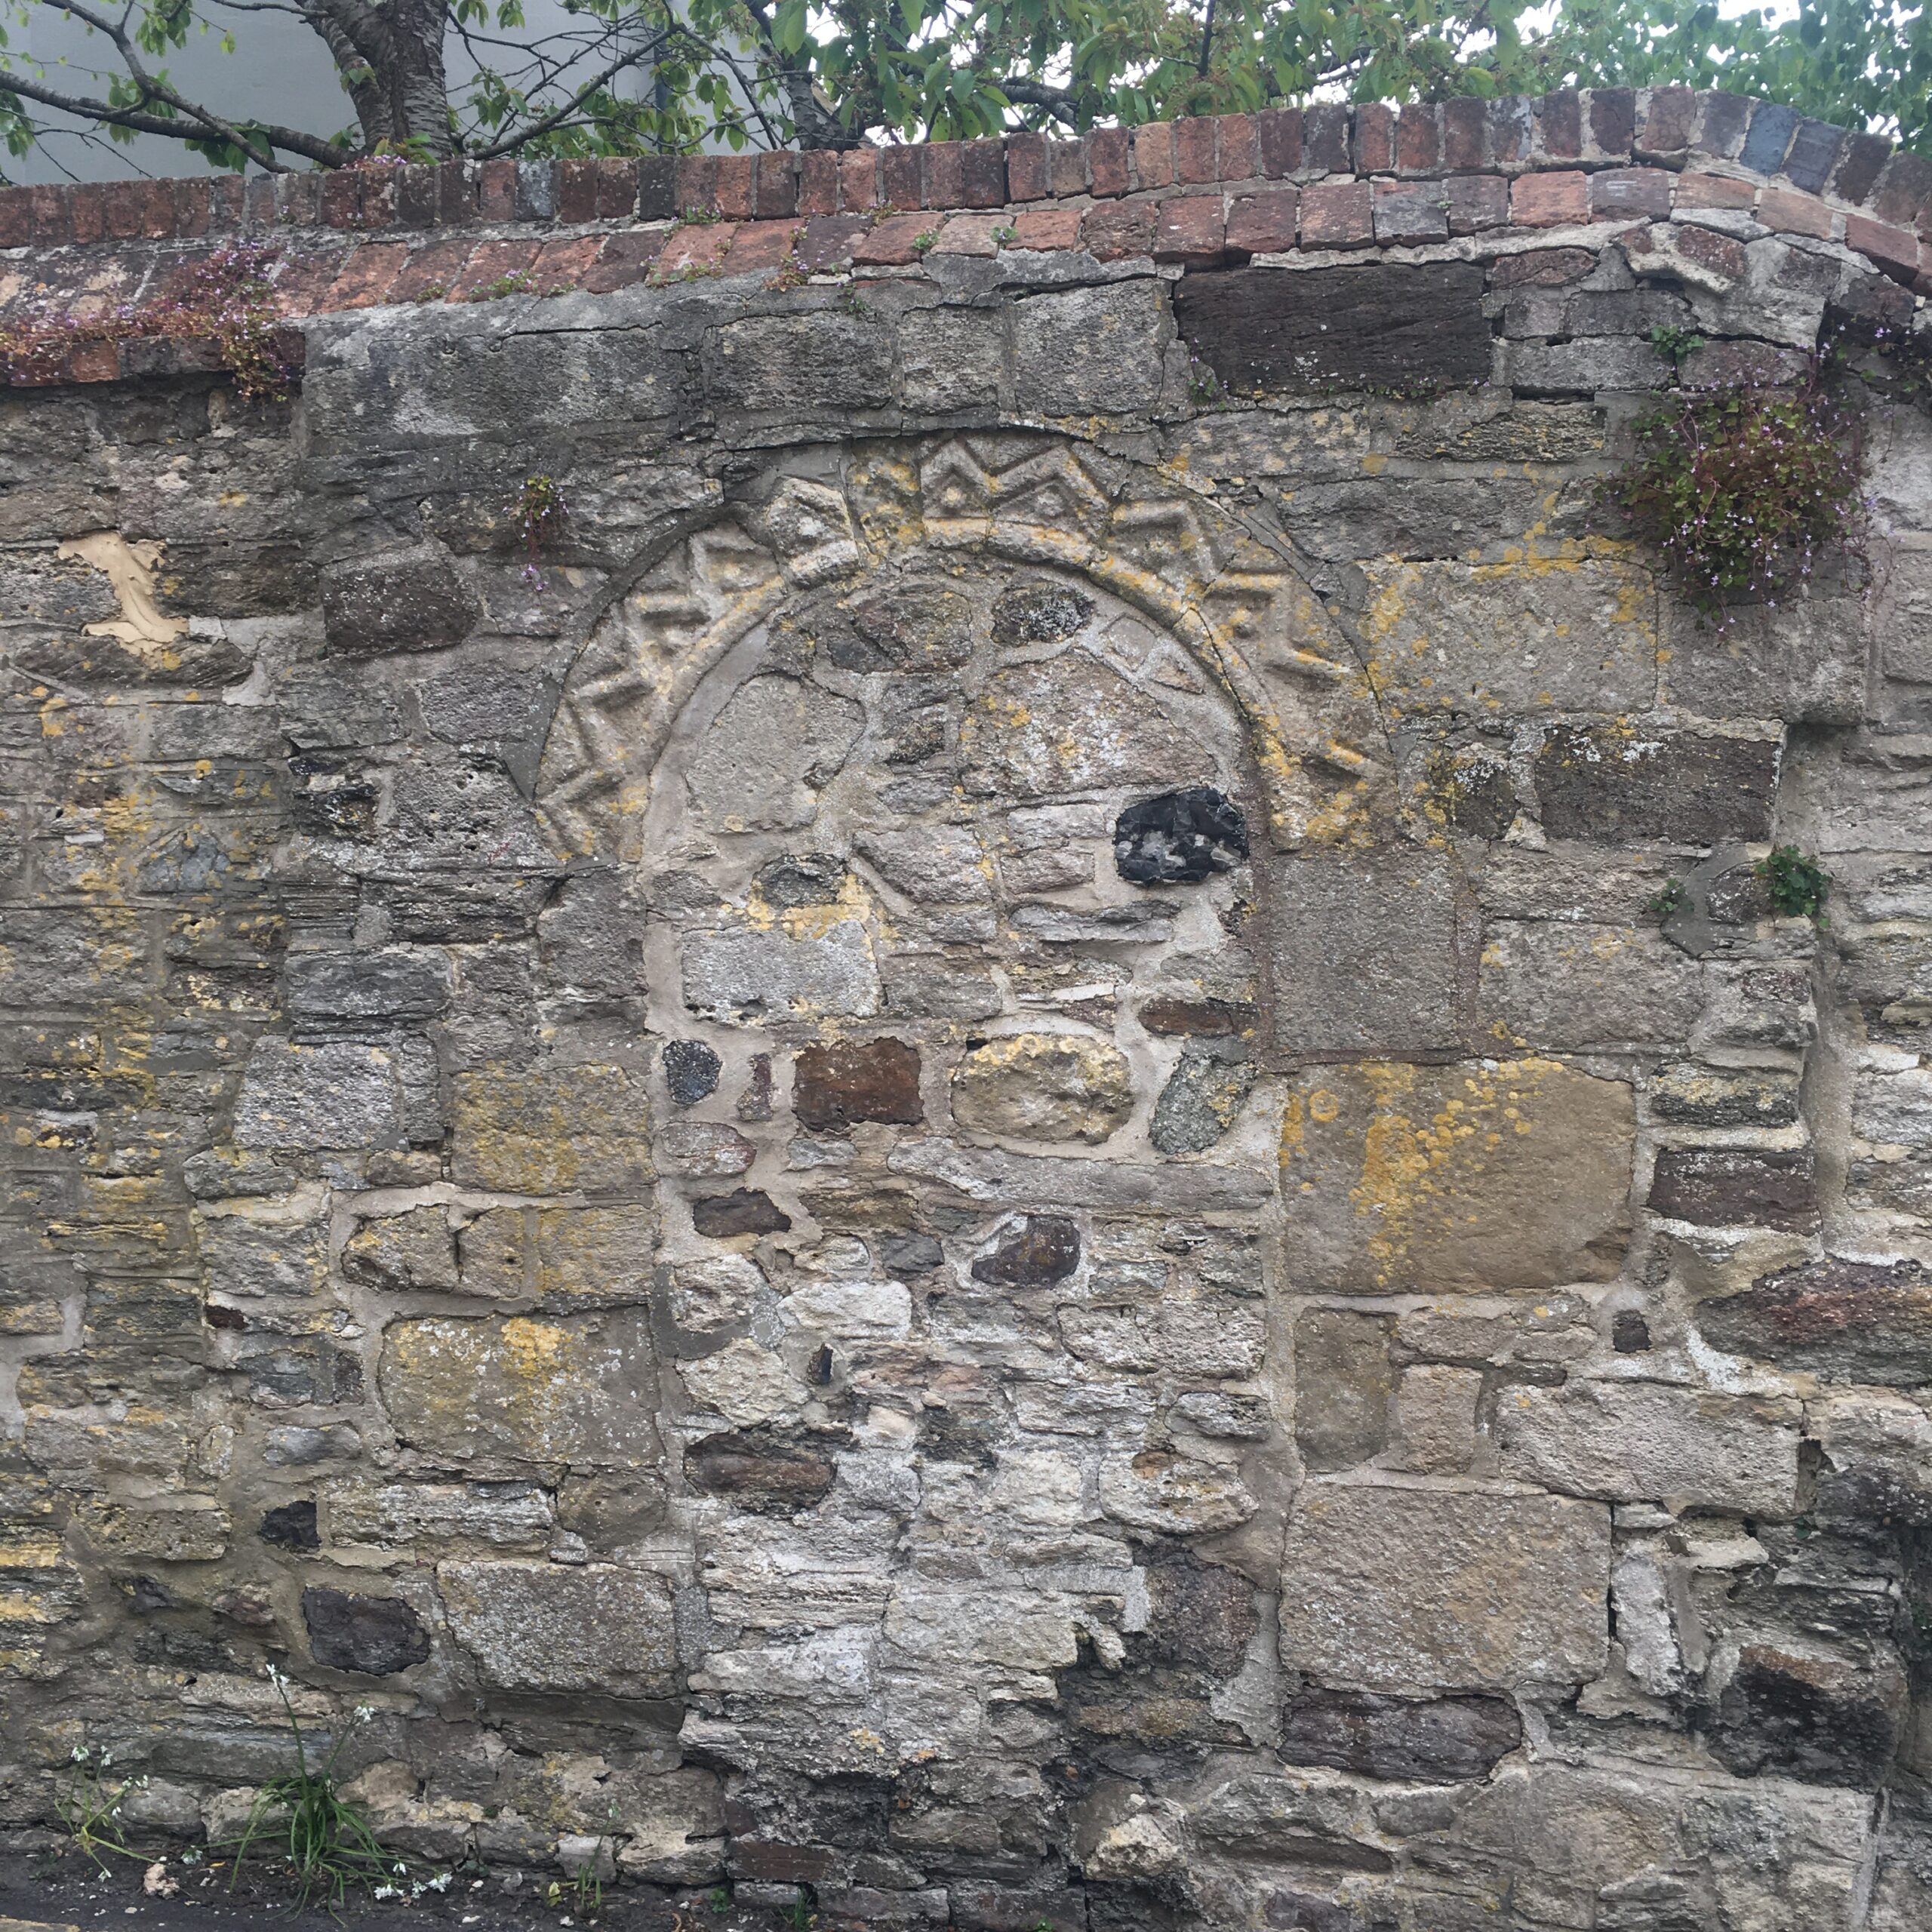 An archway believed to be part of Wareham Castle